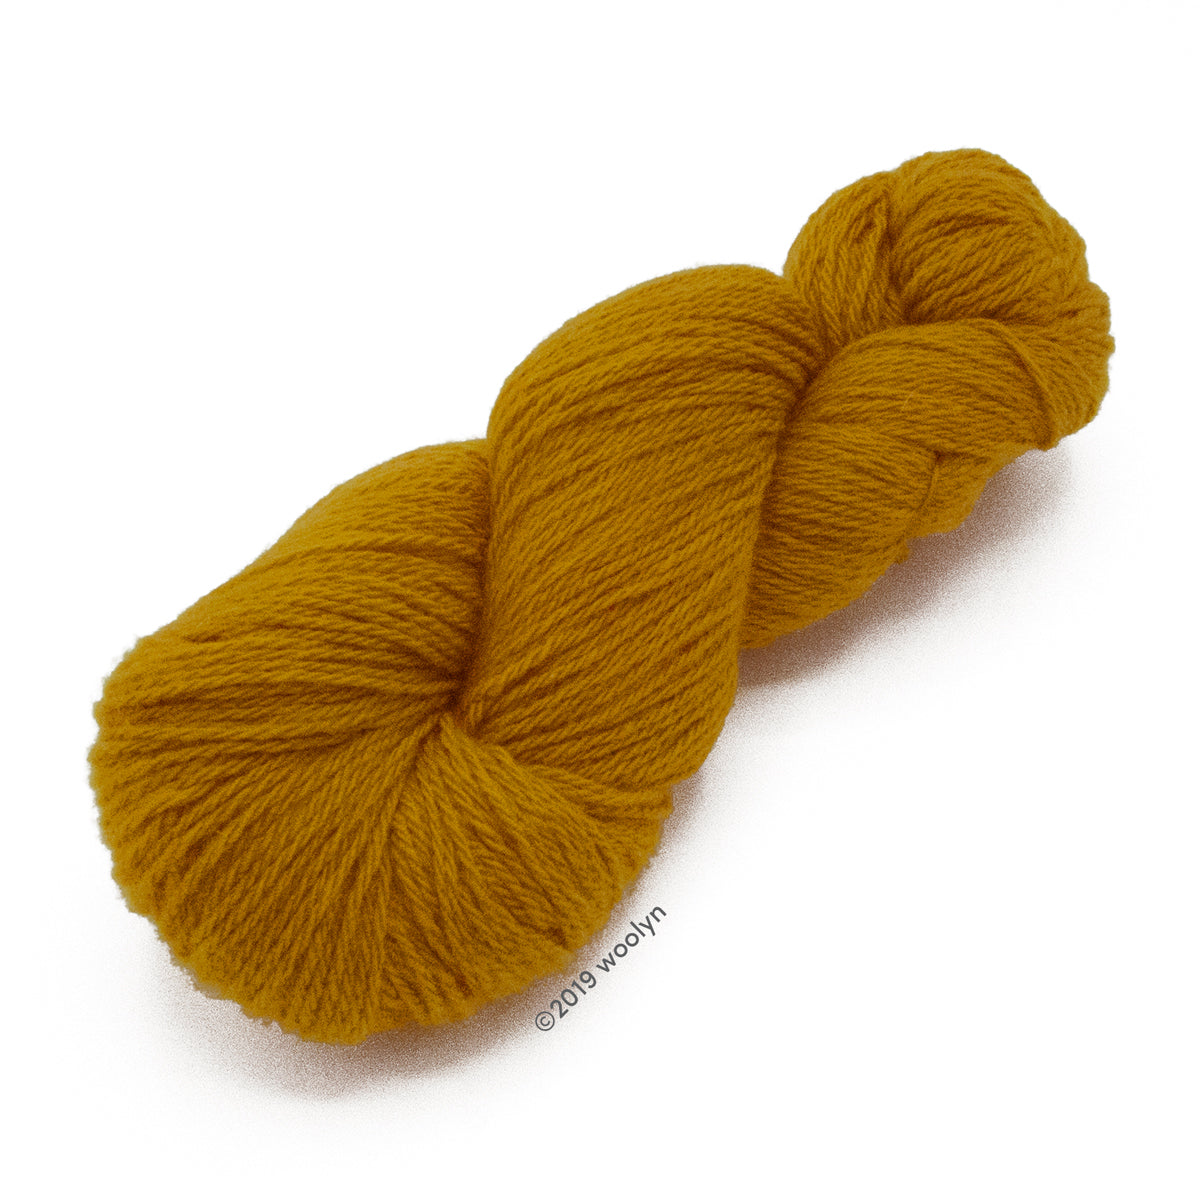 North Light Fibers Spring St in Goldenrod, a mustard color.